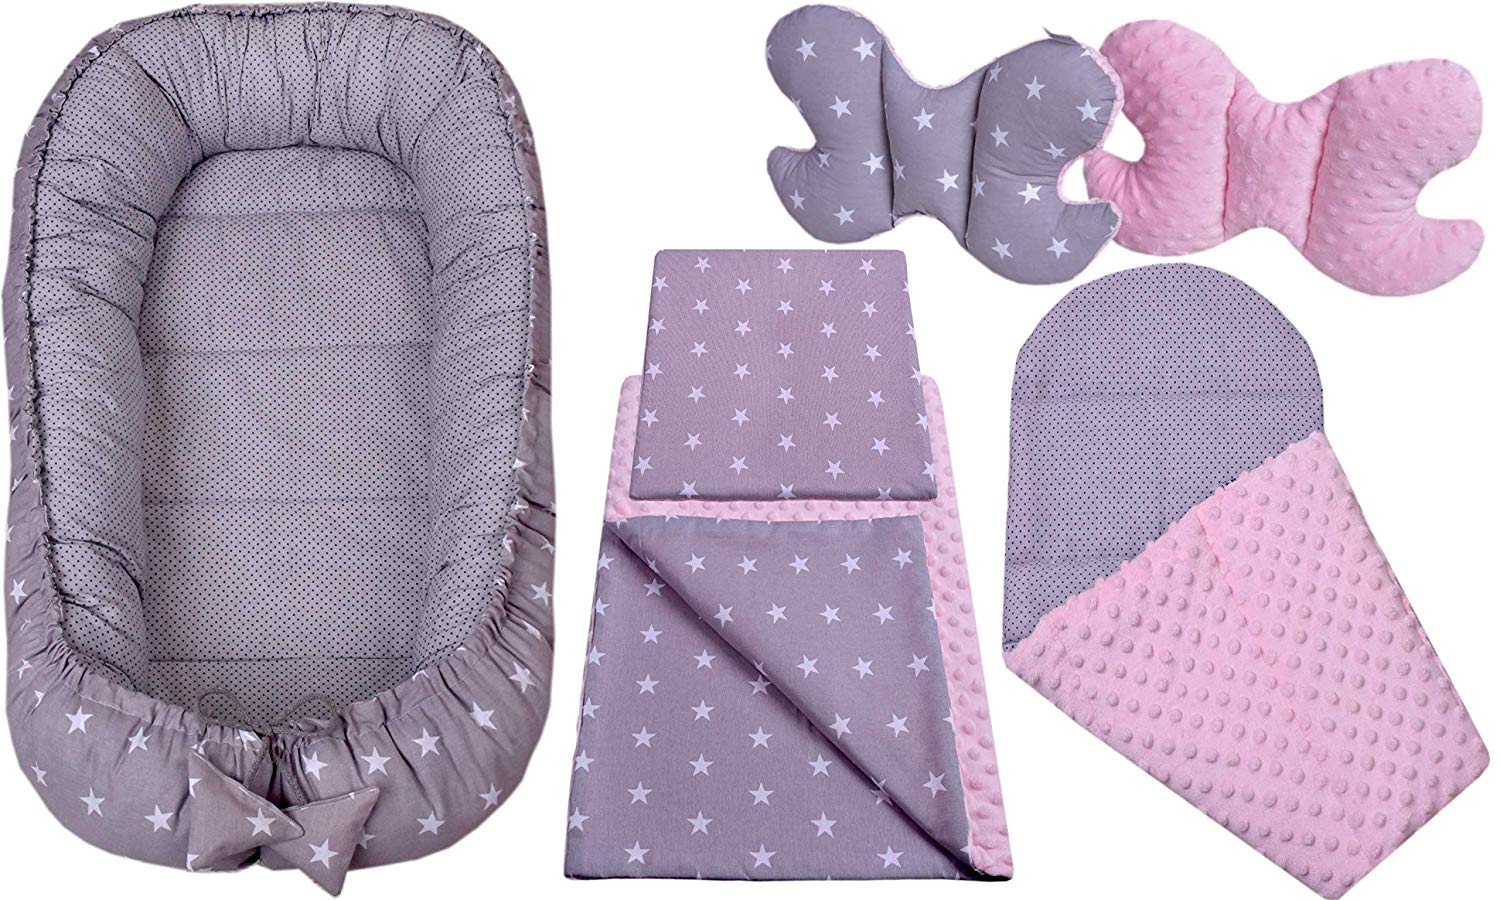 Medi Partners 5-Piece Baby Nest Set, 90 x 50 cm, Removable Insert Bed, Cuddly Nest, Crawling Blanket for Babies, Newborns, 100% Cotton (Grey Stars with Light Pink Minky)